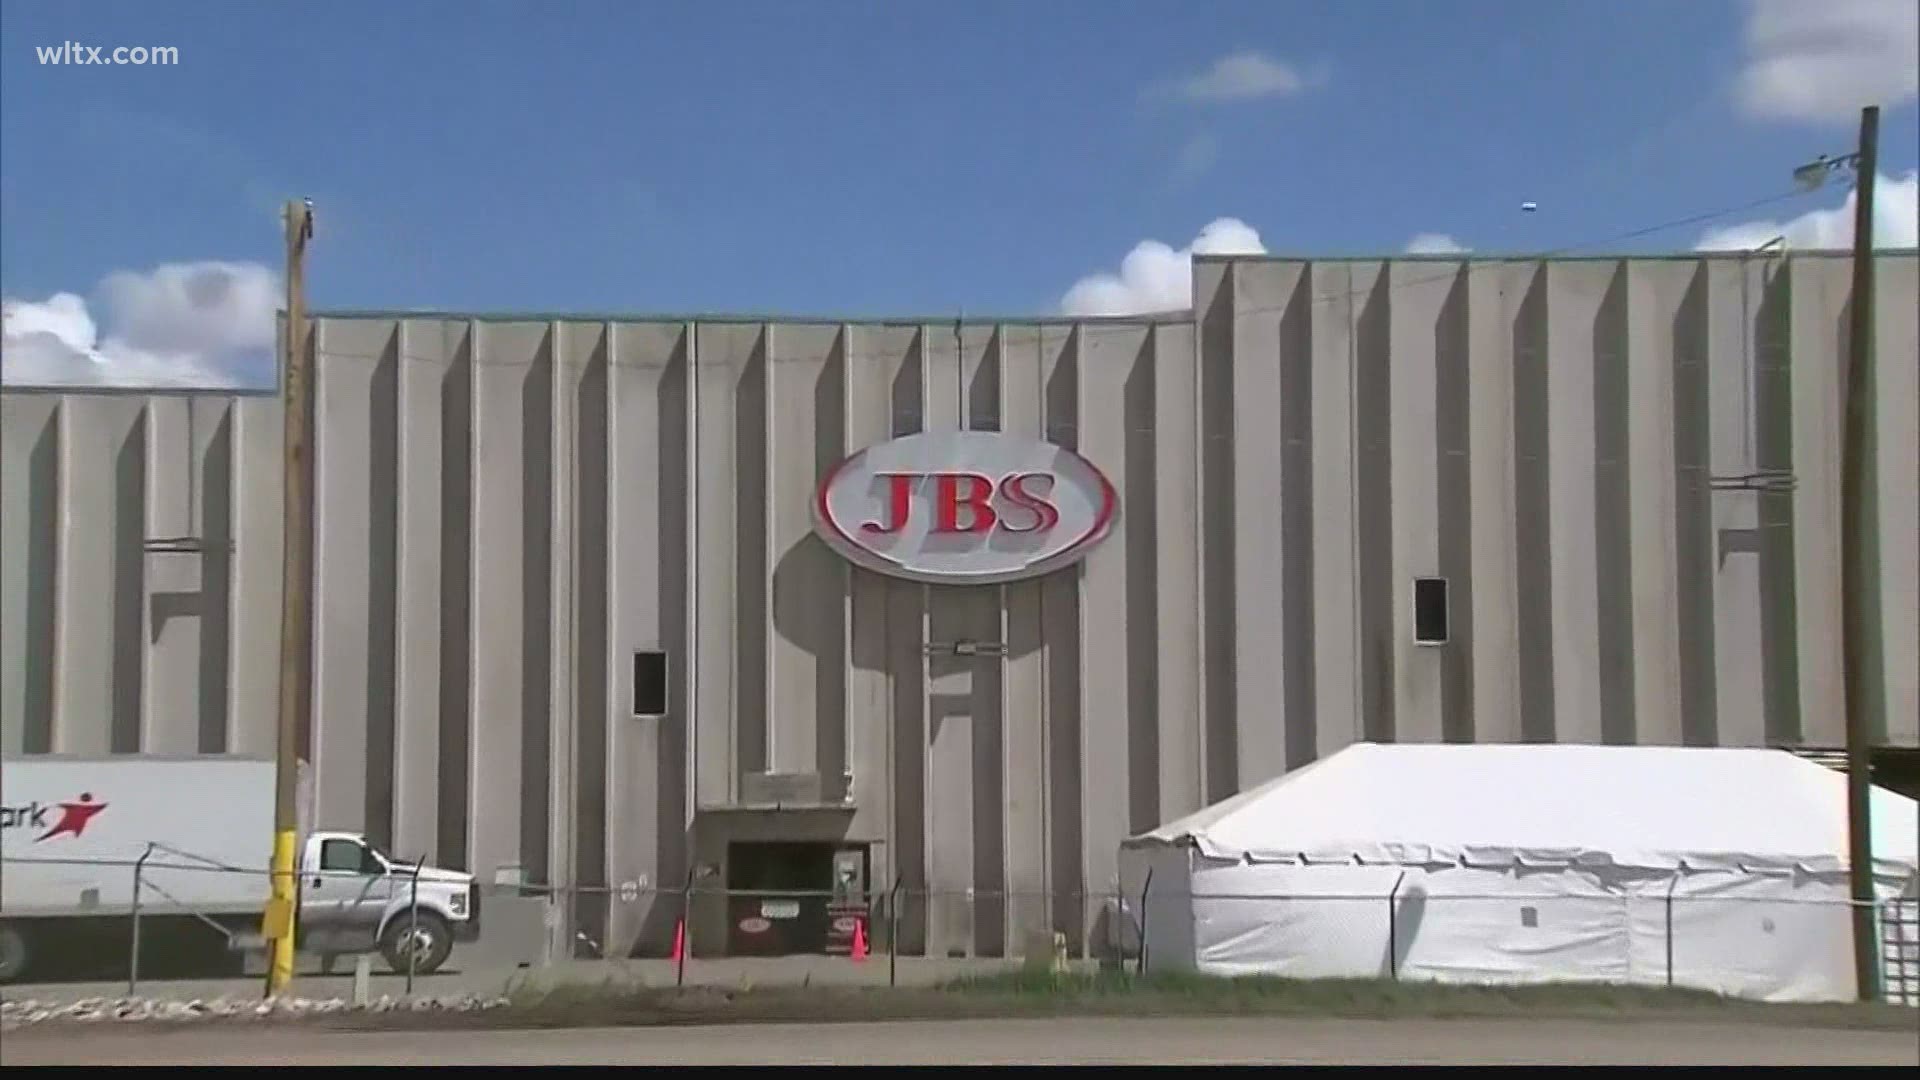 JBS is the majority shareholder of Pilgrim's Pride Corporation, a chicken processing plant located in Sumter, South Carolina.